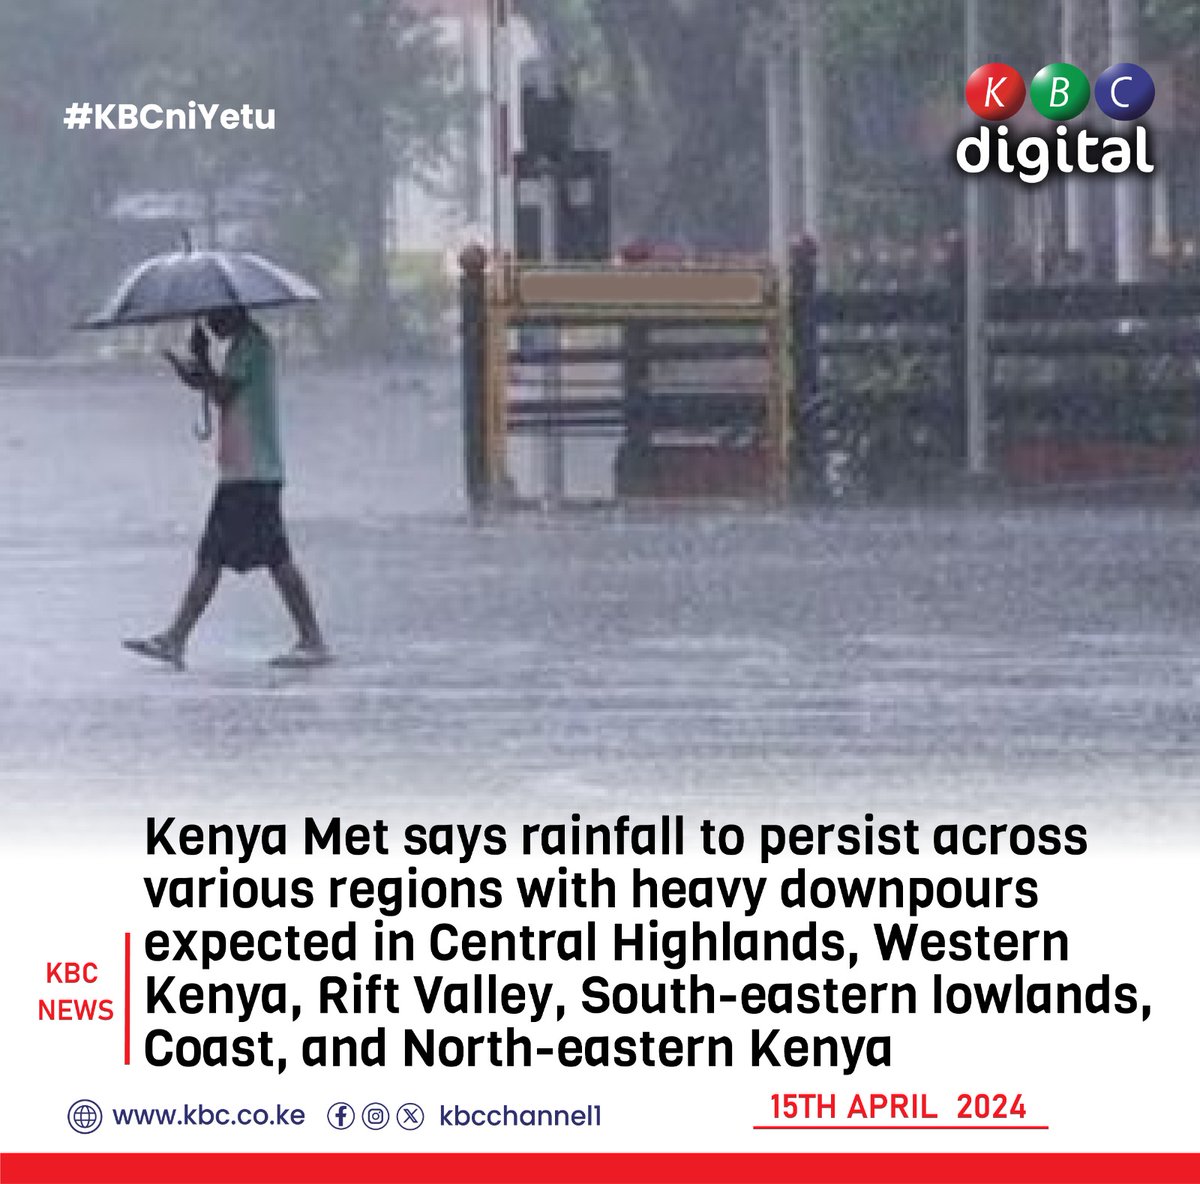 Kenya Met says rainfall to persist across various regions with heavy downpours expected in Central Highlands, Western Kenya, Rift Valley, South-eastern lowlands, Coast, and North-eastern Kenya. #KBCniYetu